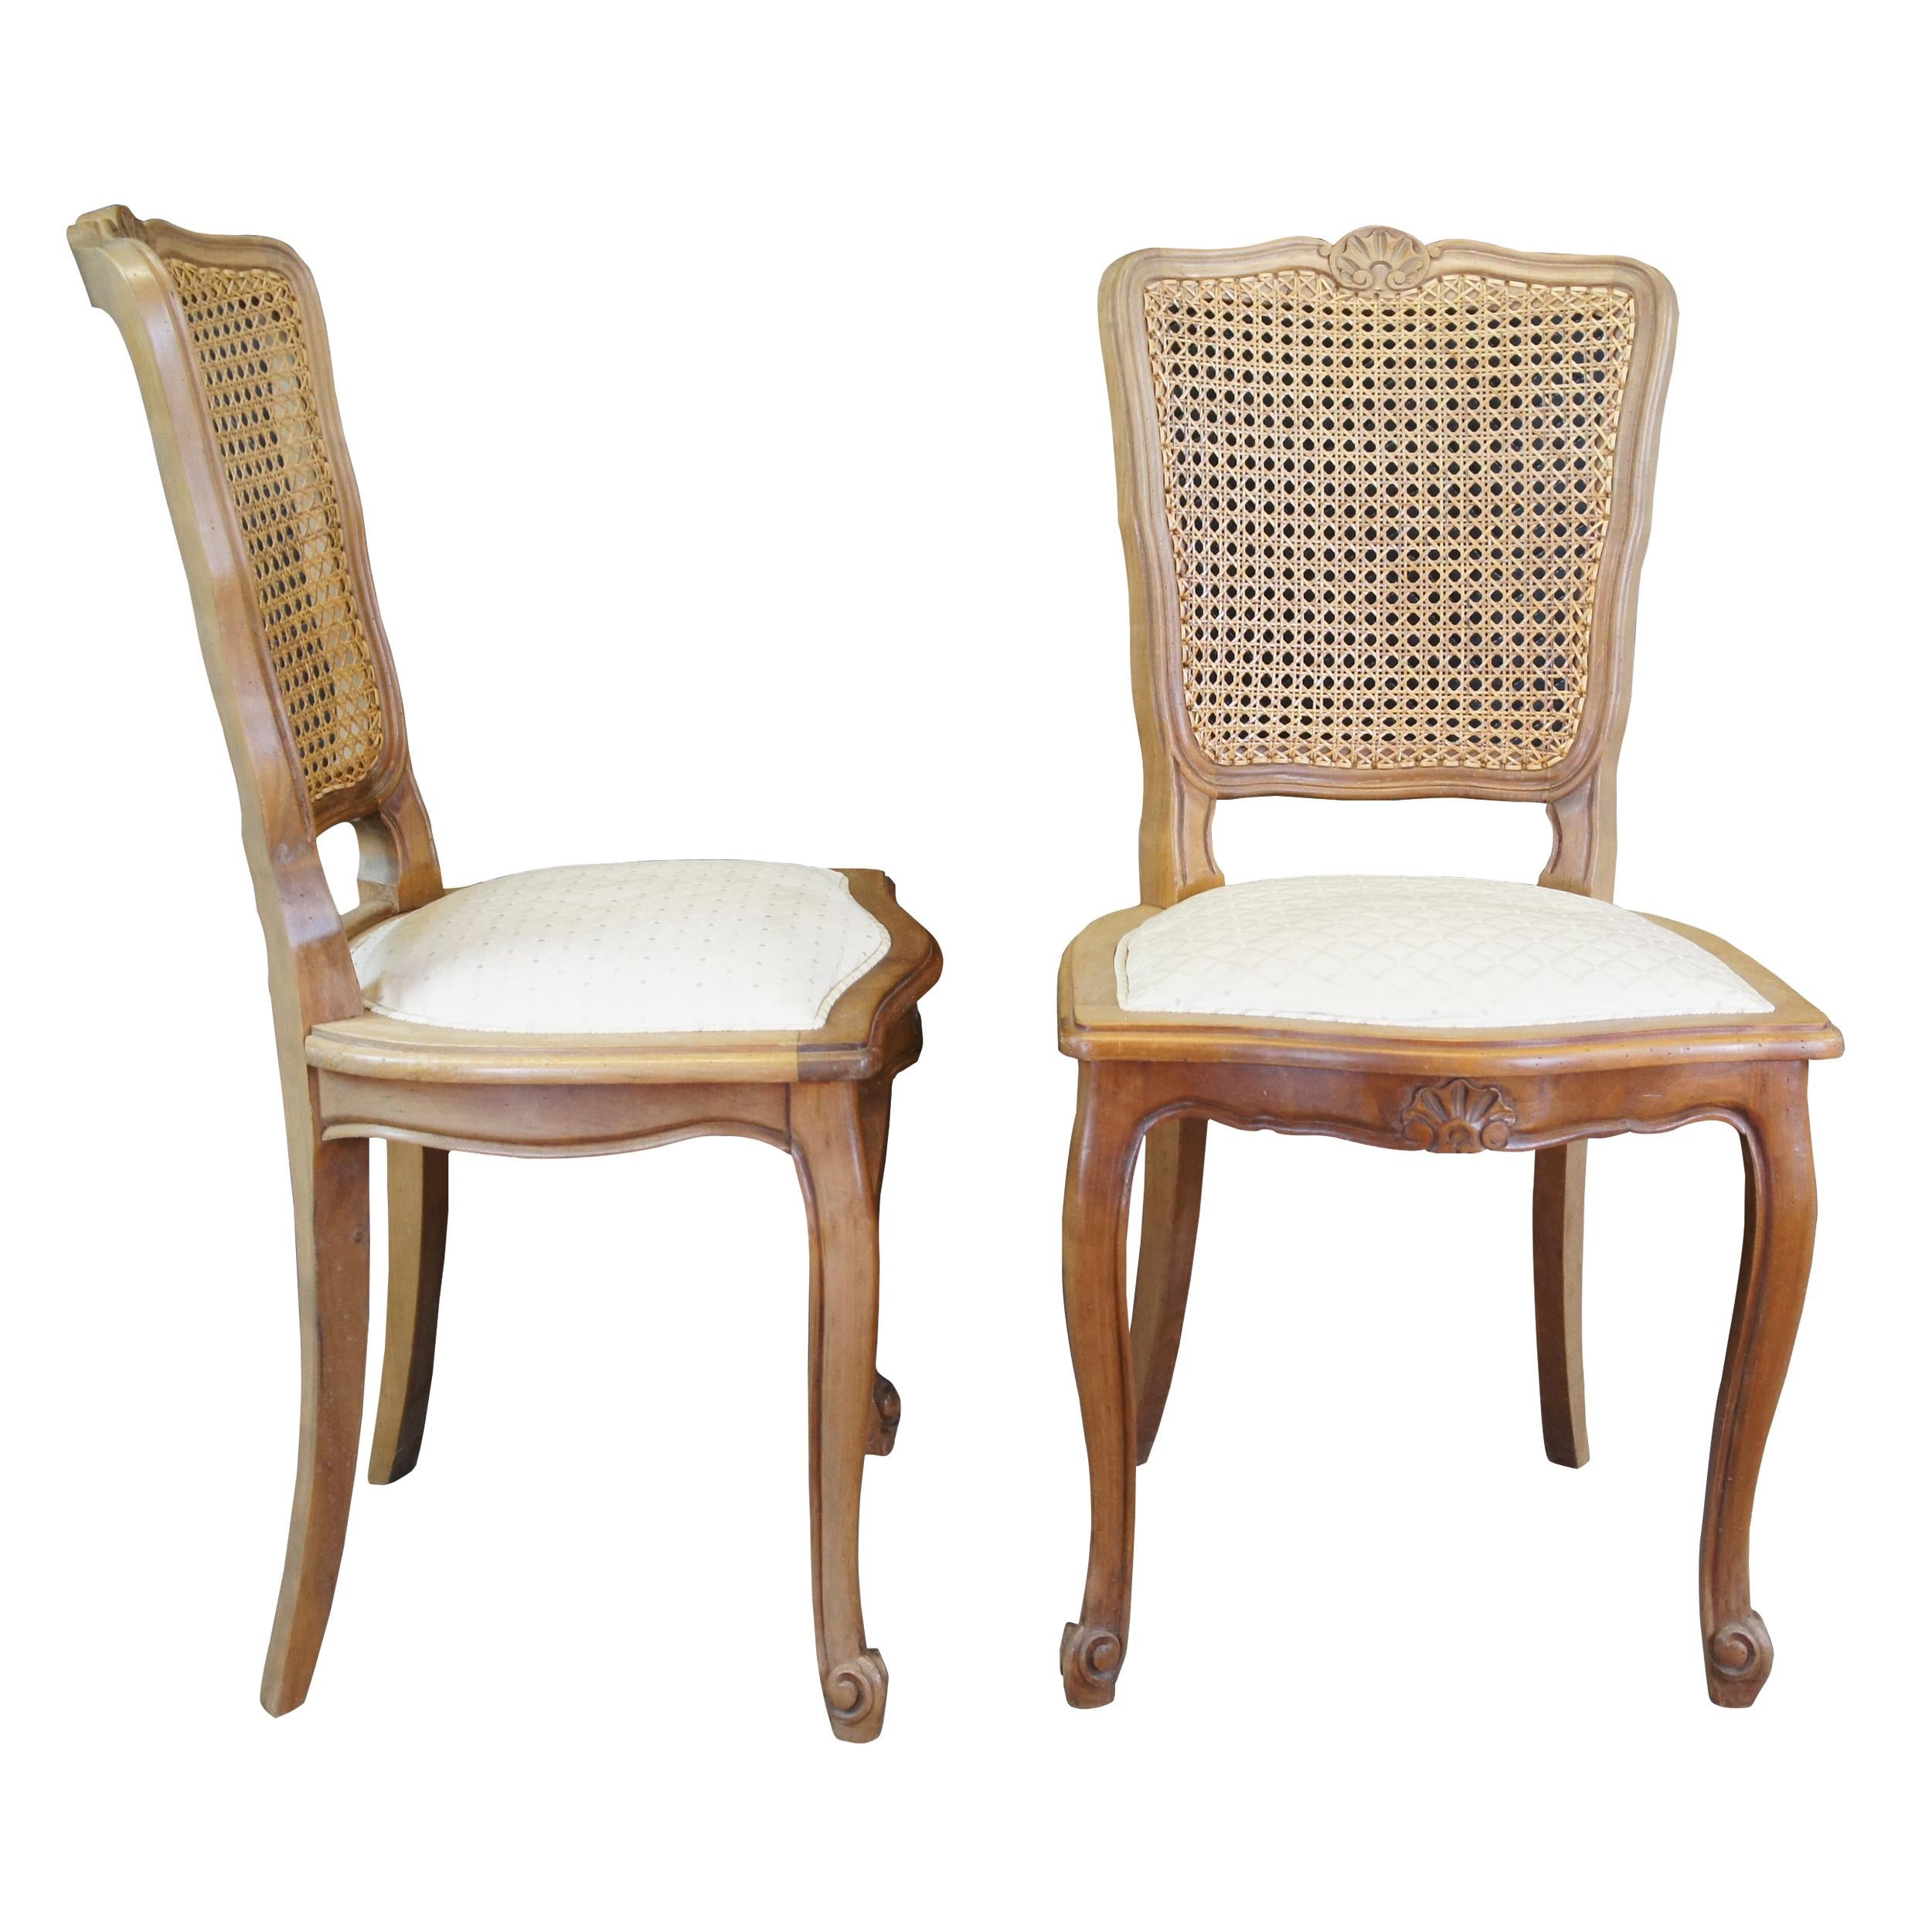 Tricoire vintage French Country dining chairs, circa 1980s. Made from naturally distressed solid walnut with a serpentine scalloped crest rail, contoured stiles, cane back and upholstered seat. The chairs are supported by cabriole legs along the